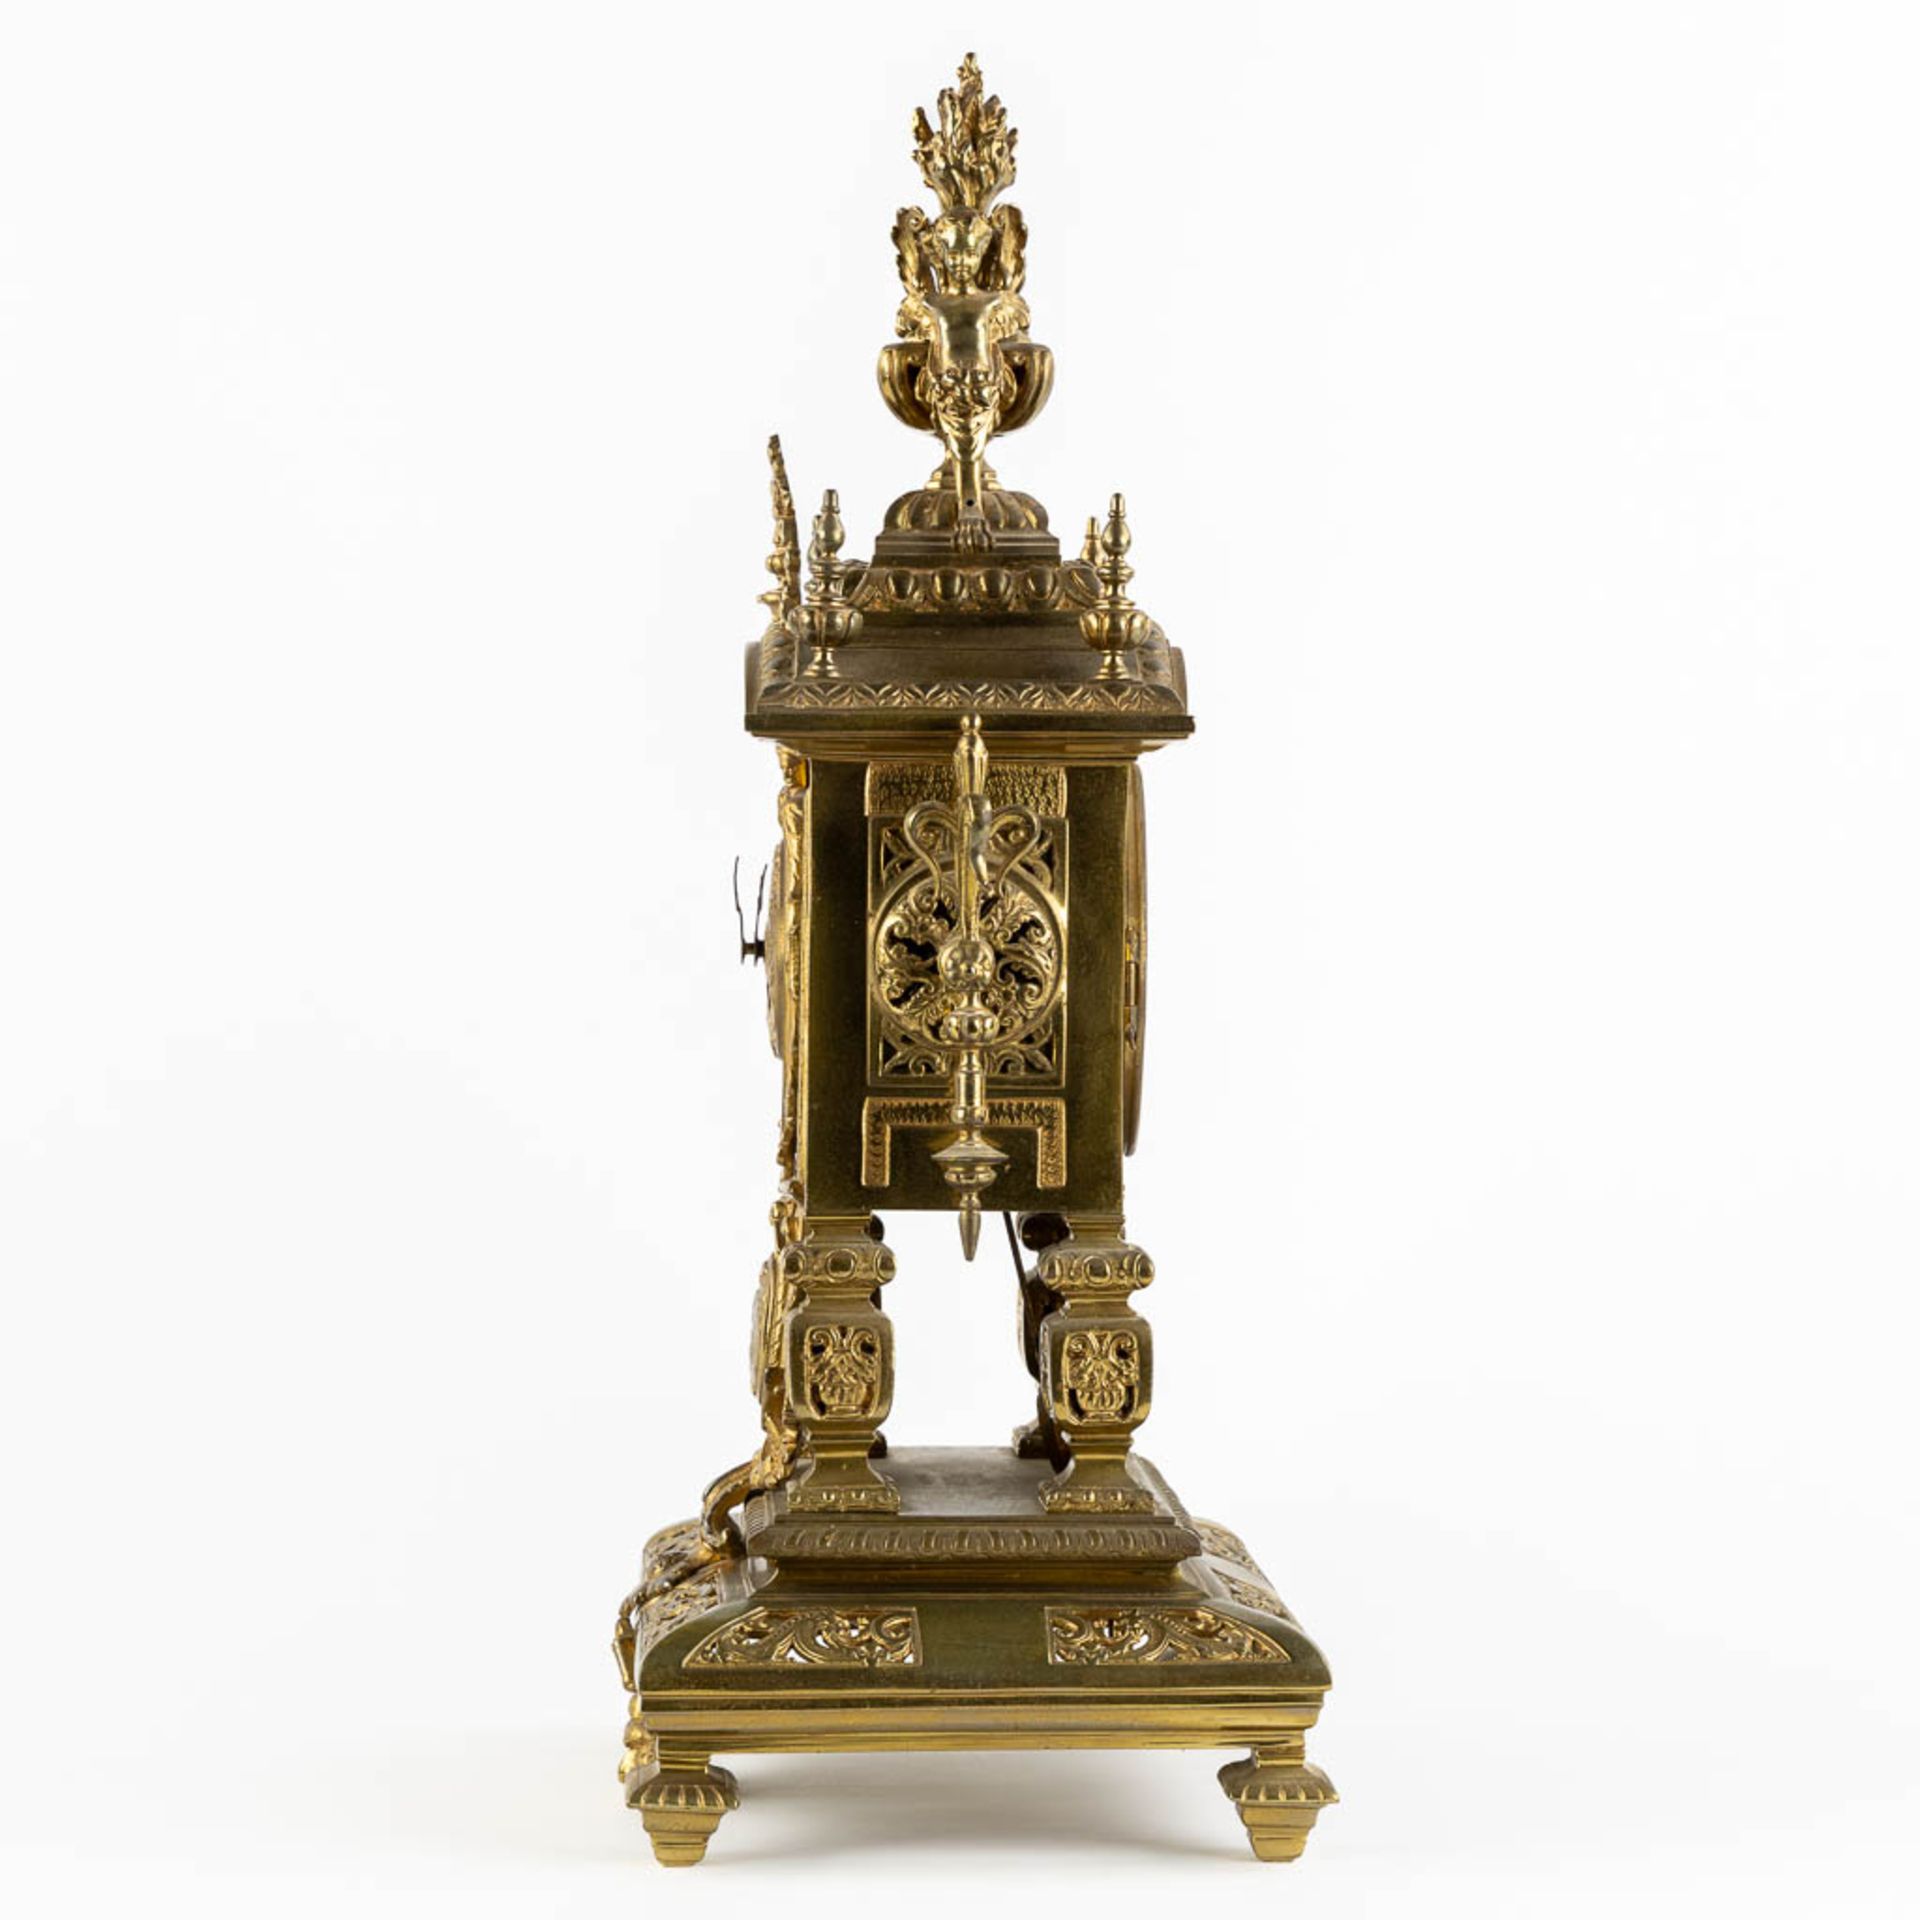 A mantle clock, bronze decorated with angels. Circa 1900. (L:21 x W:27 x H:54 cm) - Image 6 of 13